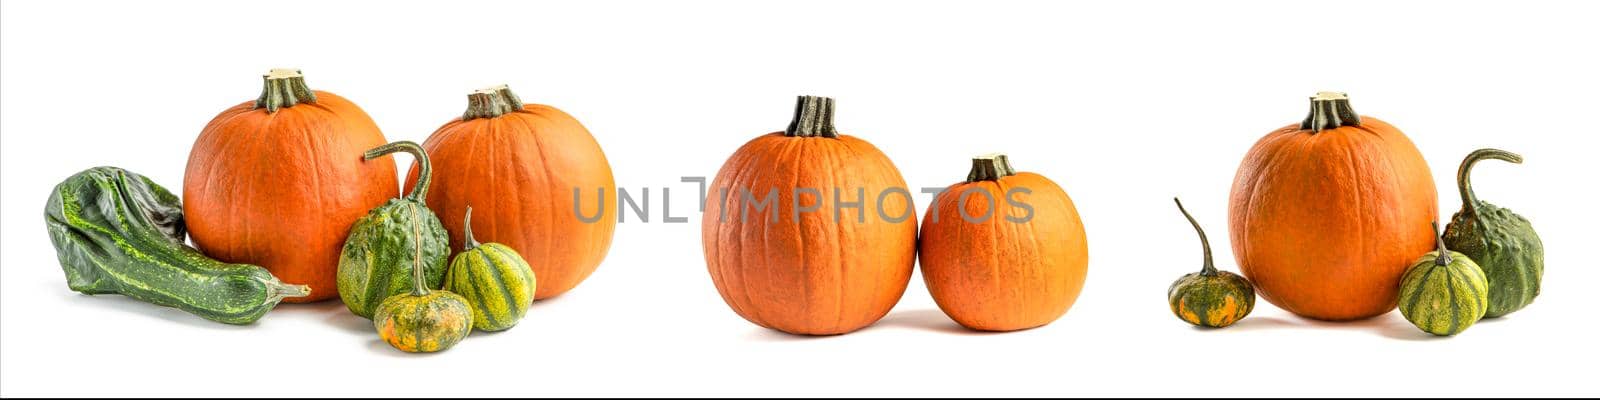 Autumn set of pumpkins isolated on white background for Halloween decoration. Set of pumpkins of different colors and shapes, green and orange.